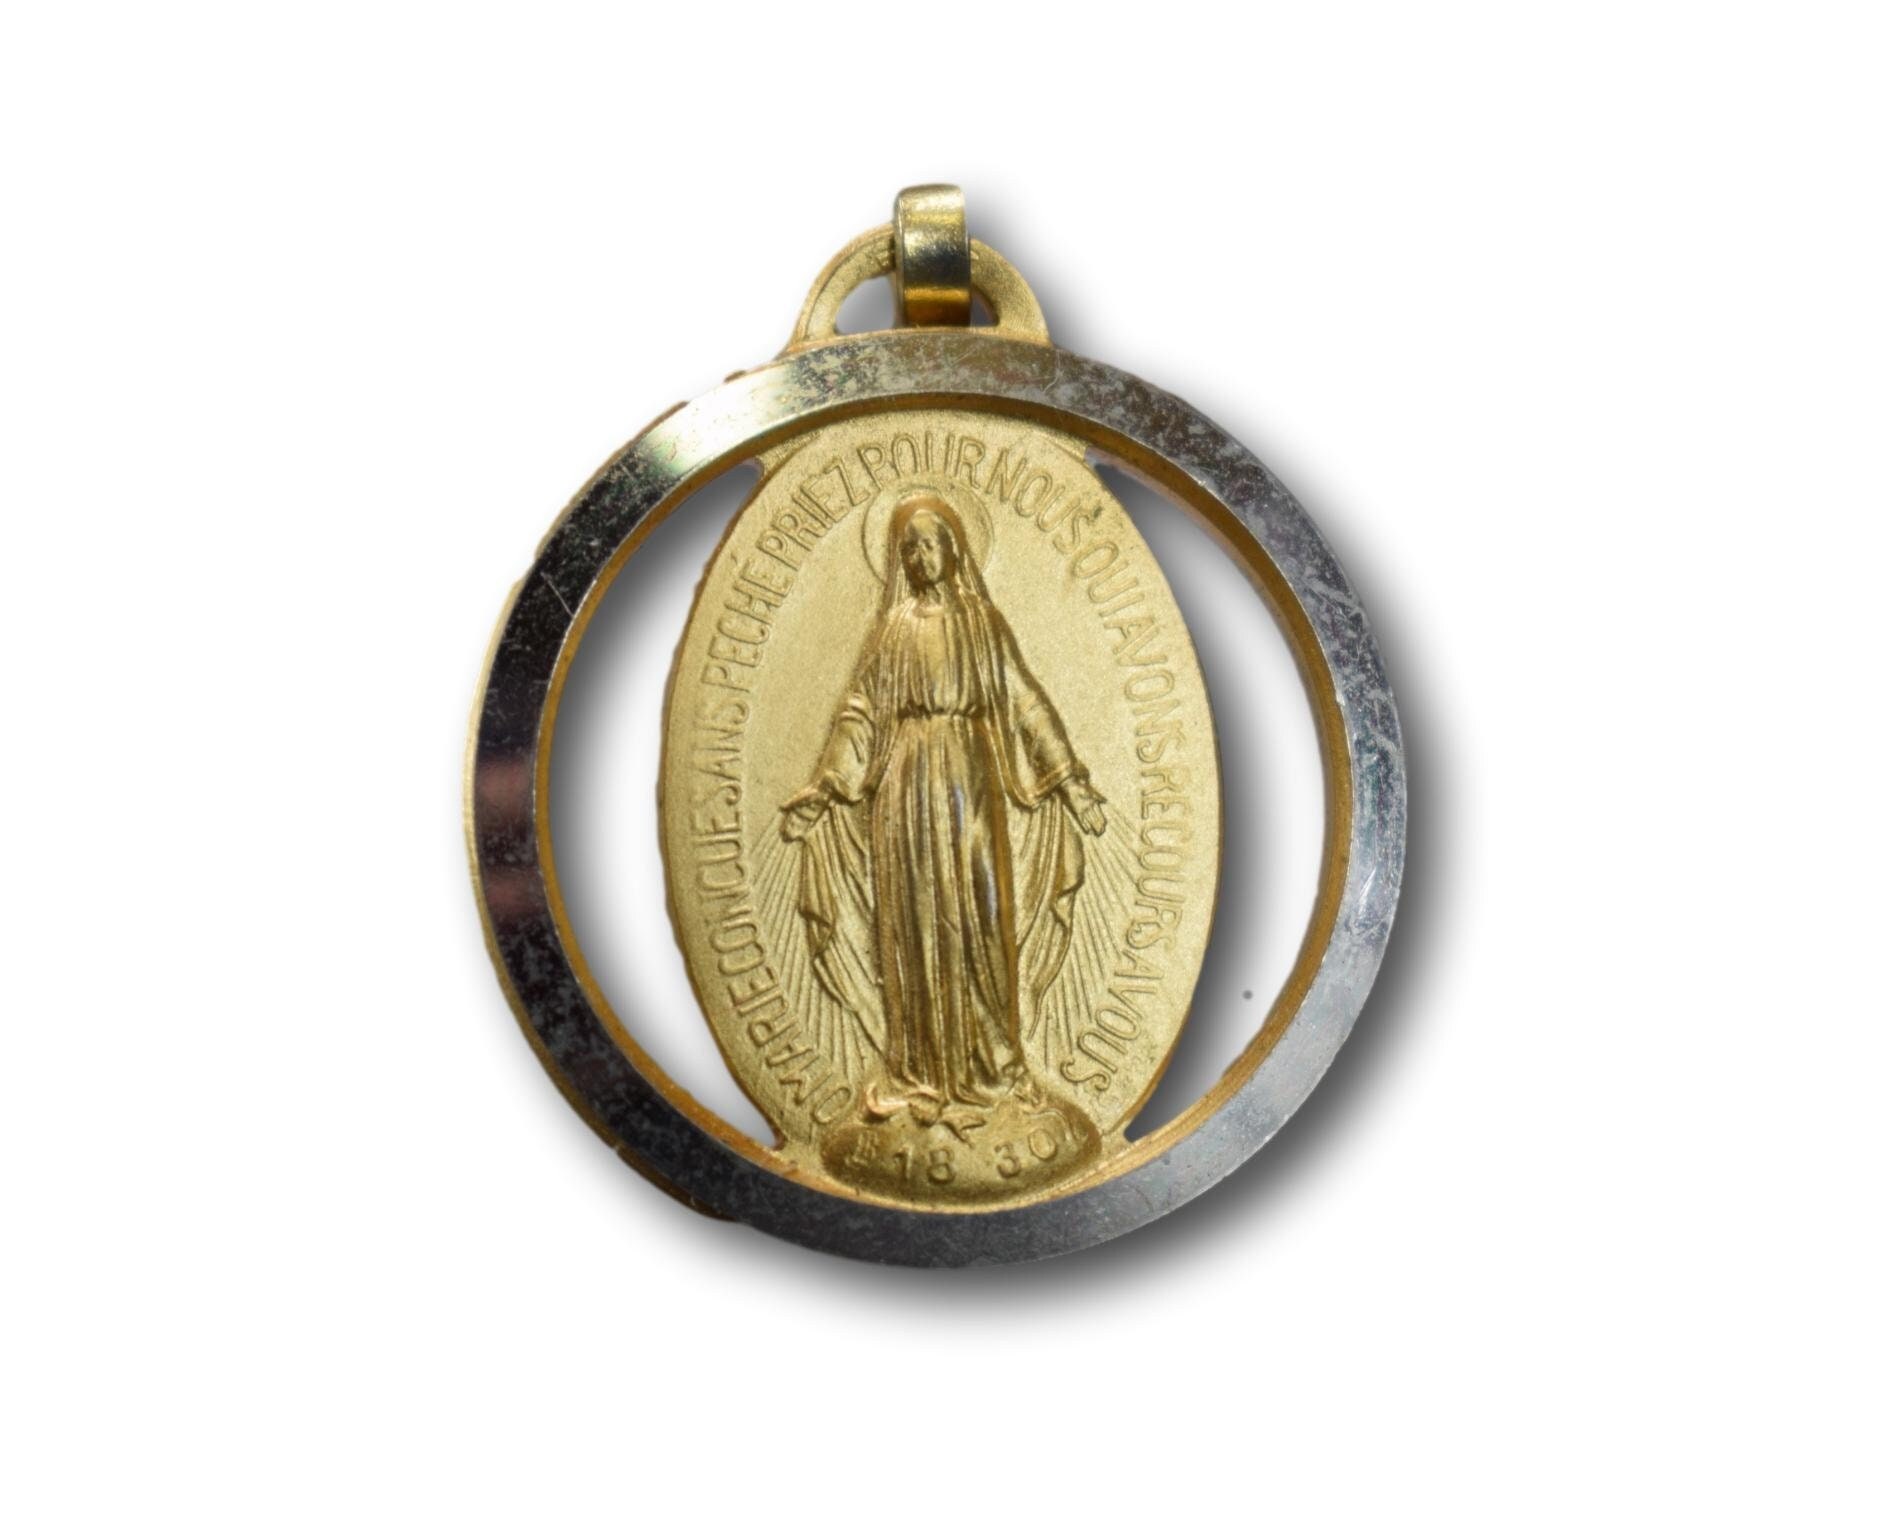 Extra Large Miraculrous Medal, Sterling Silver 925 Our Lady of